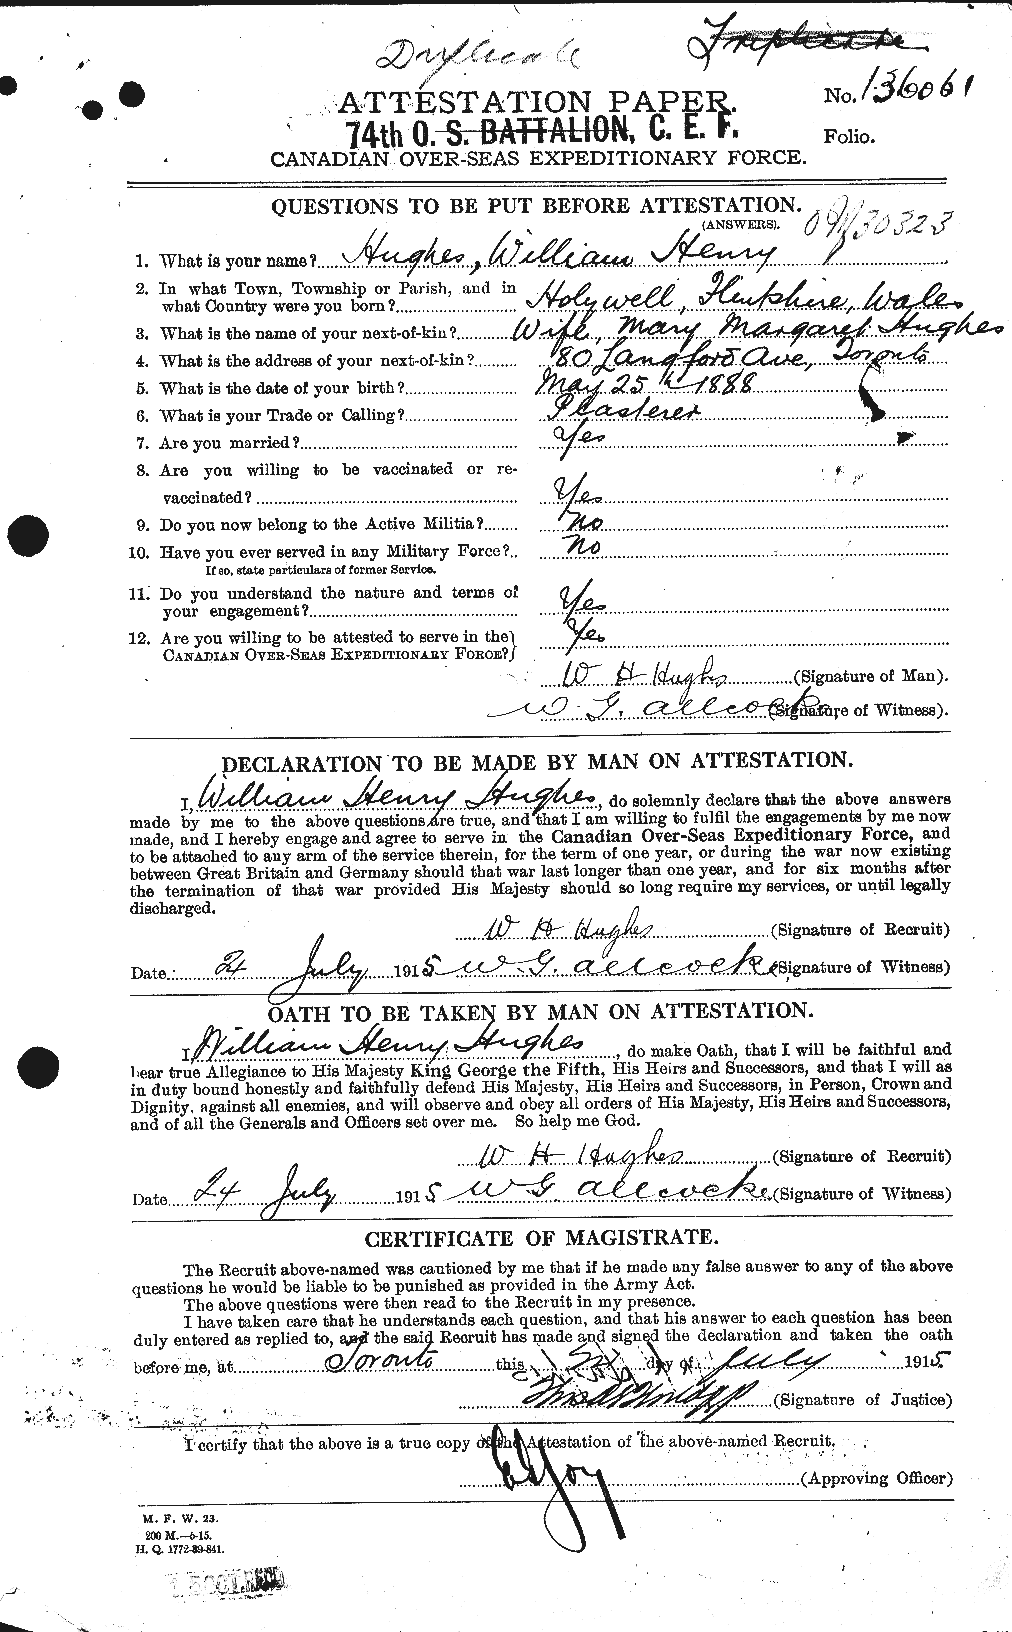 Personnel Records of the First World War - CEF 405929a